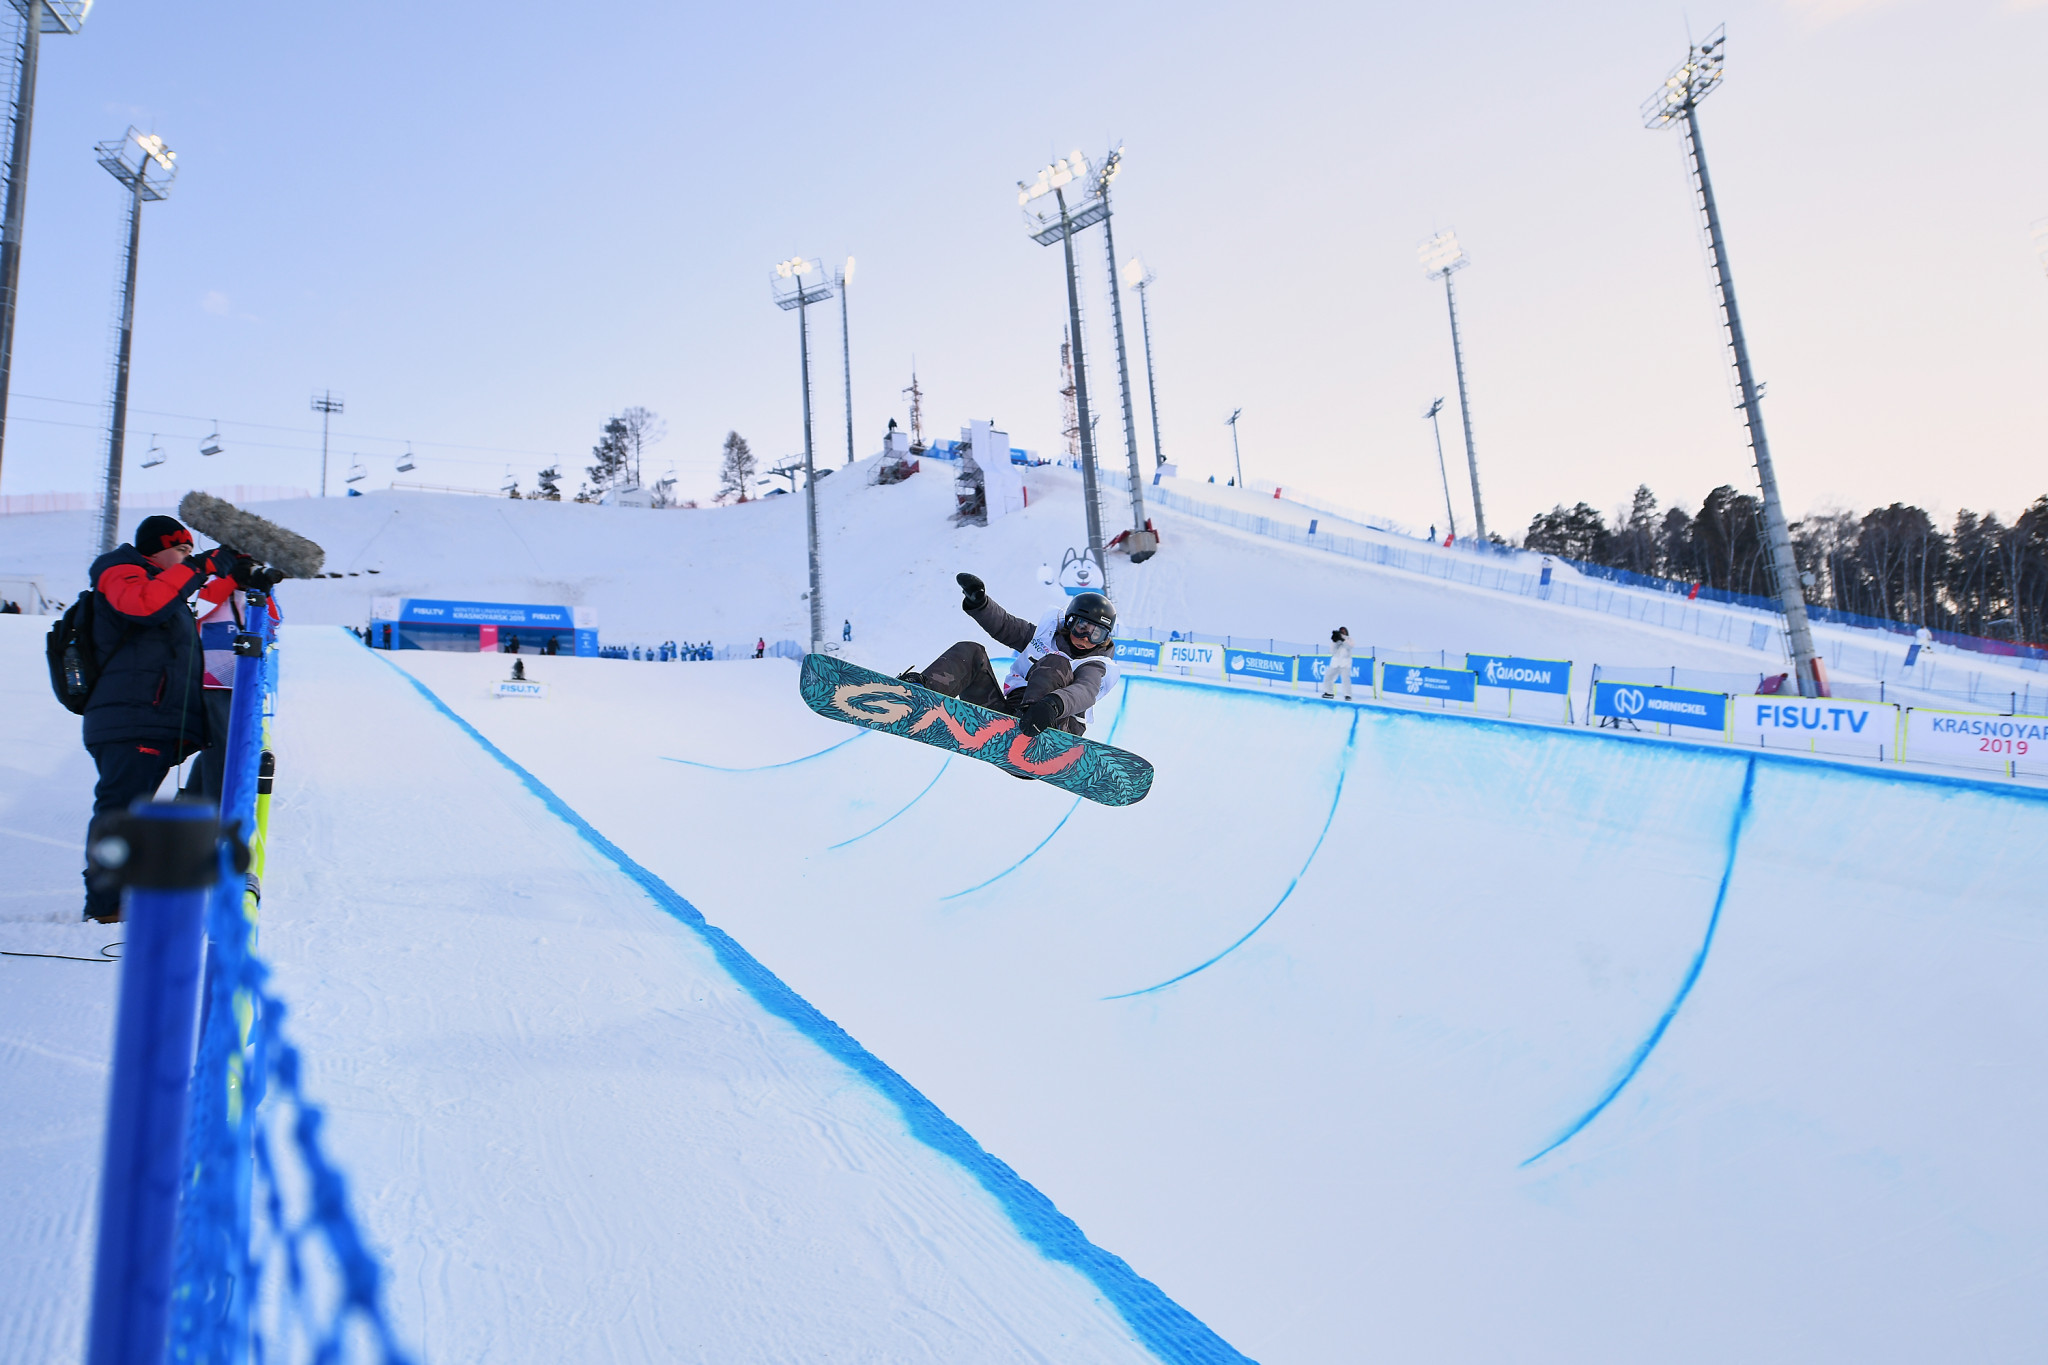 Krasnoyarsk's snowboard halfpipe facilities were used for the first time in the competition ©Krasnoyarsk 2019